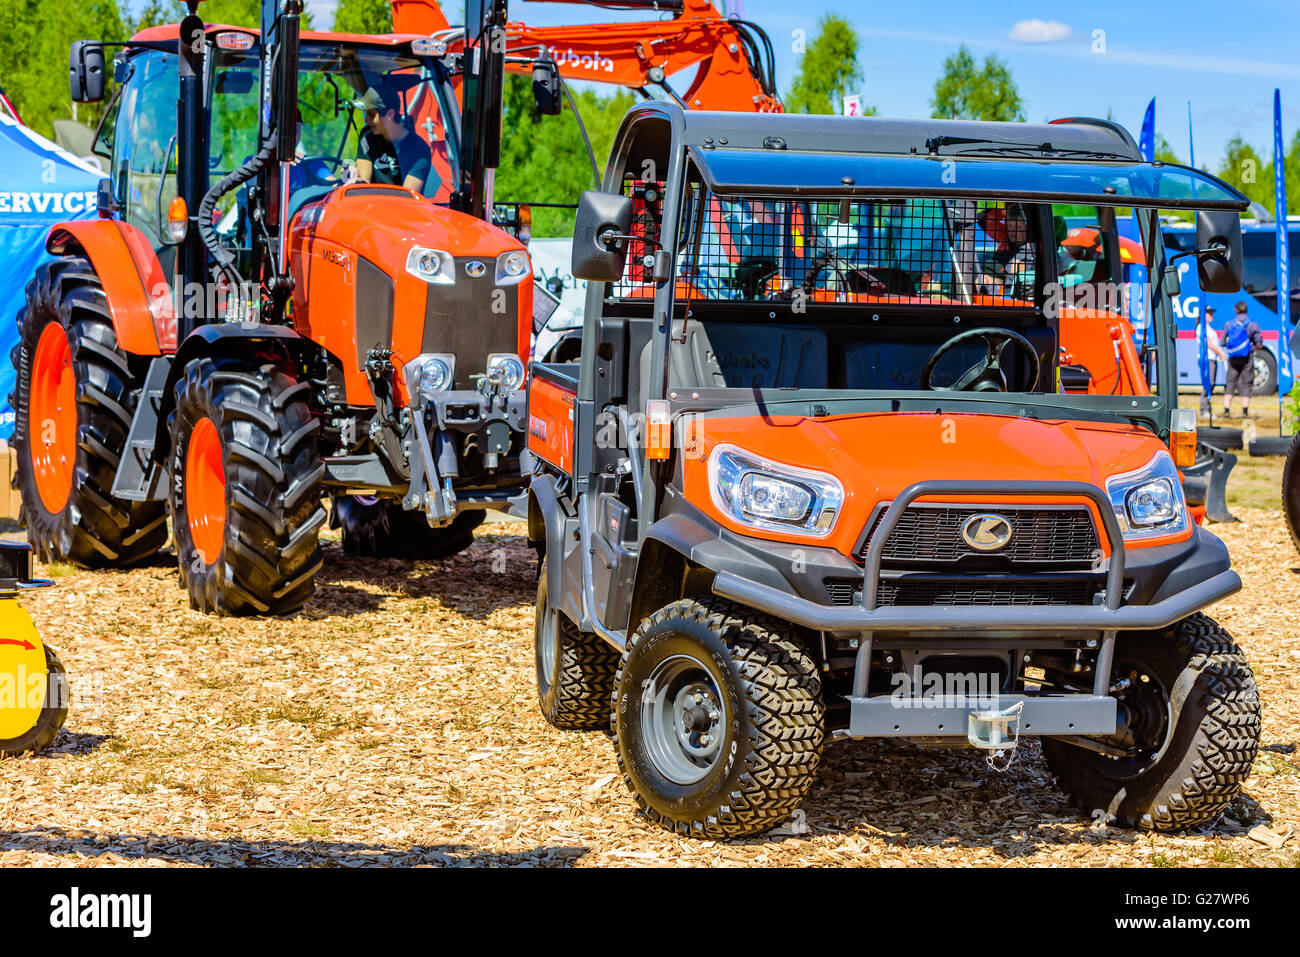 Emmaboda, Sweden - May 13, 2016: Forest and tractor (Skog och traktor) fair. Kubota 4WD utility vehicle RTV x900 with tractor in Stock Photo